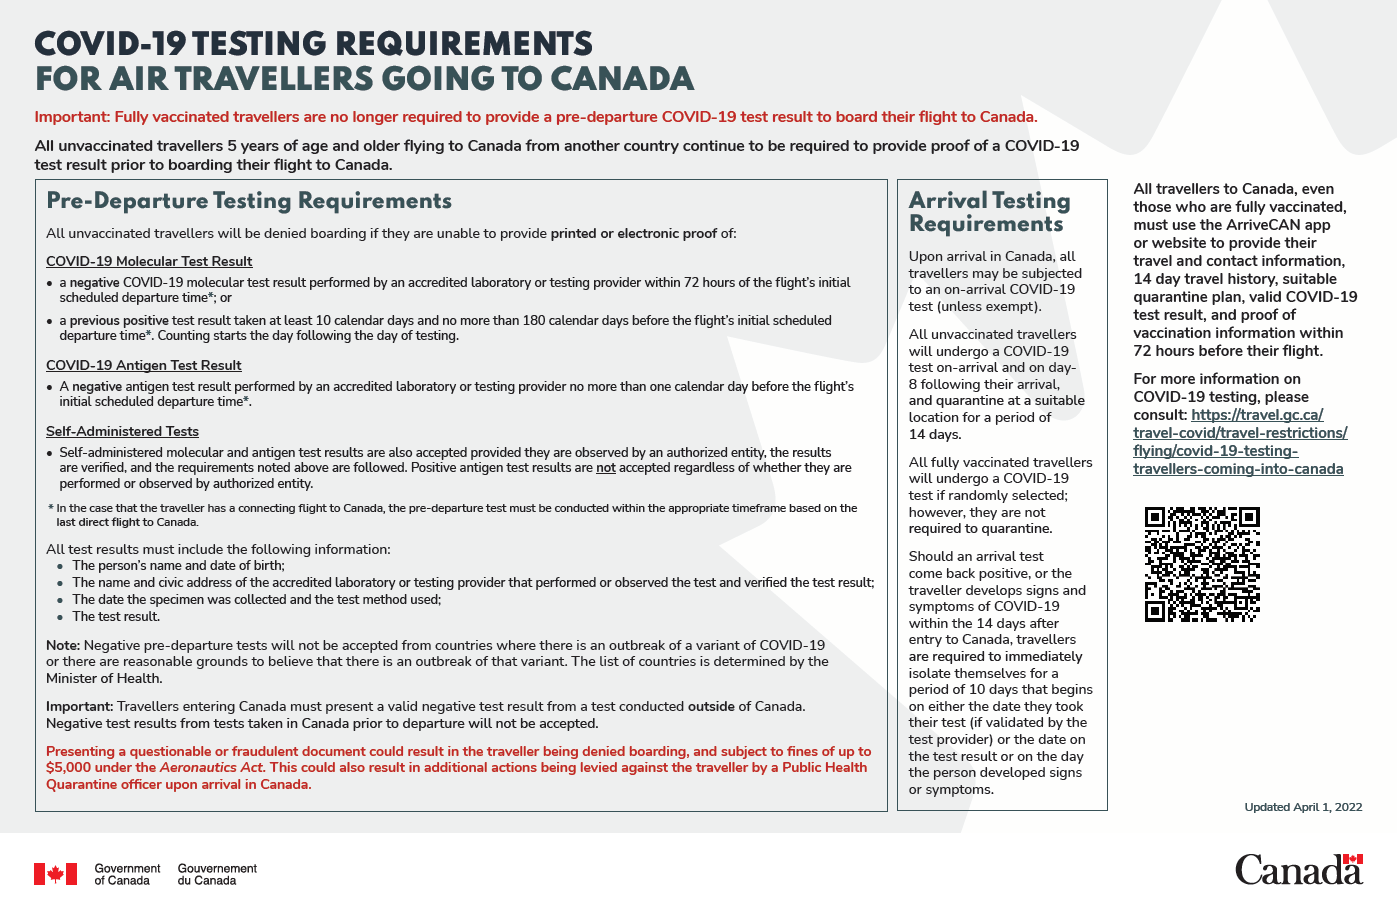 Poster on COVID-19 testing requirements for air travellers going to Canada